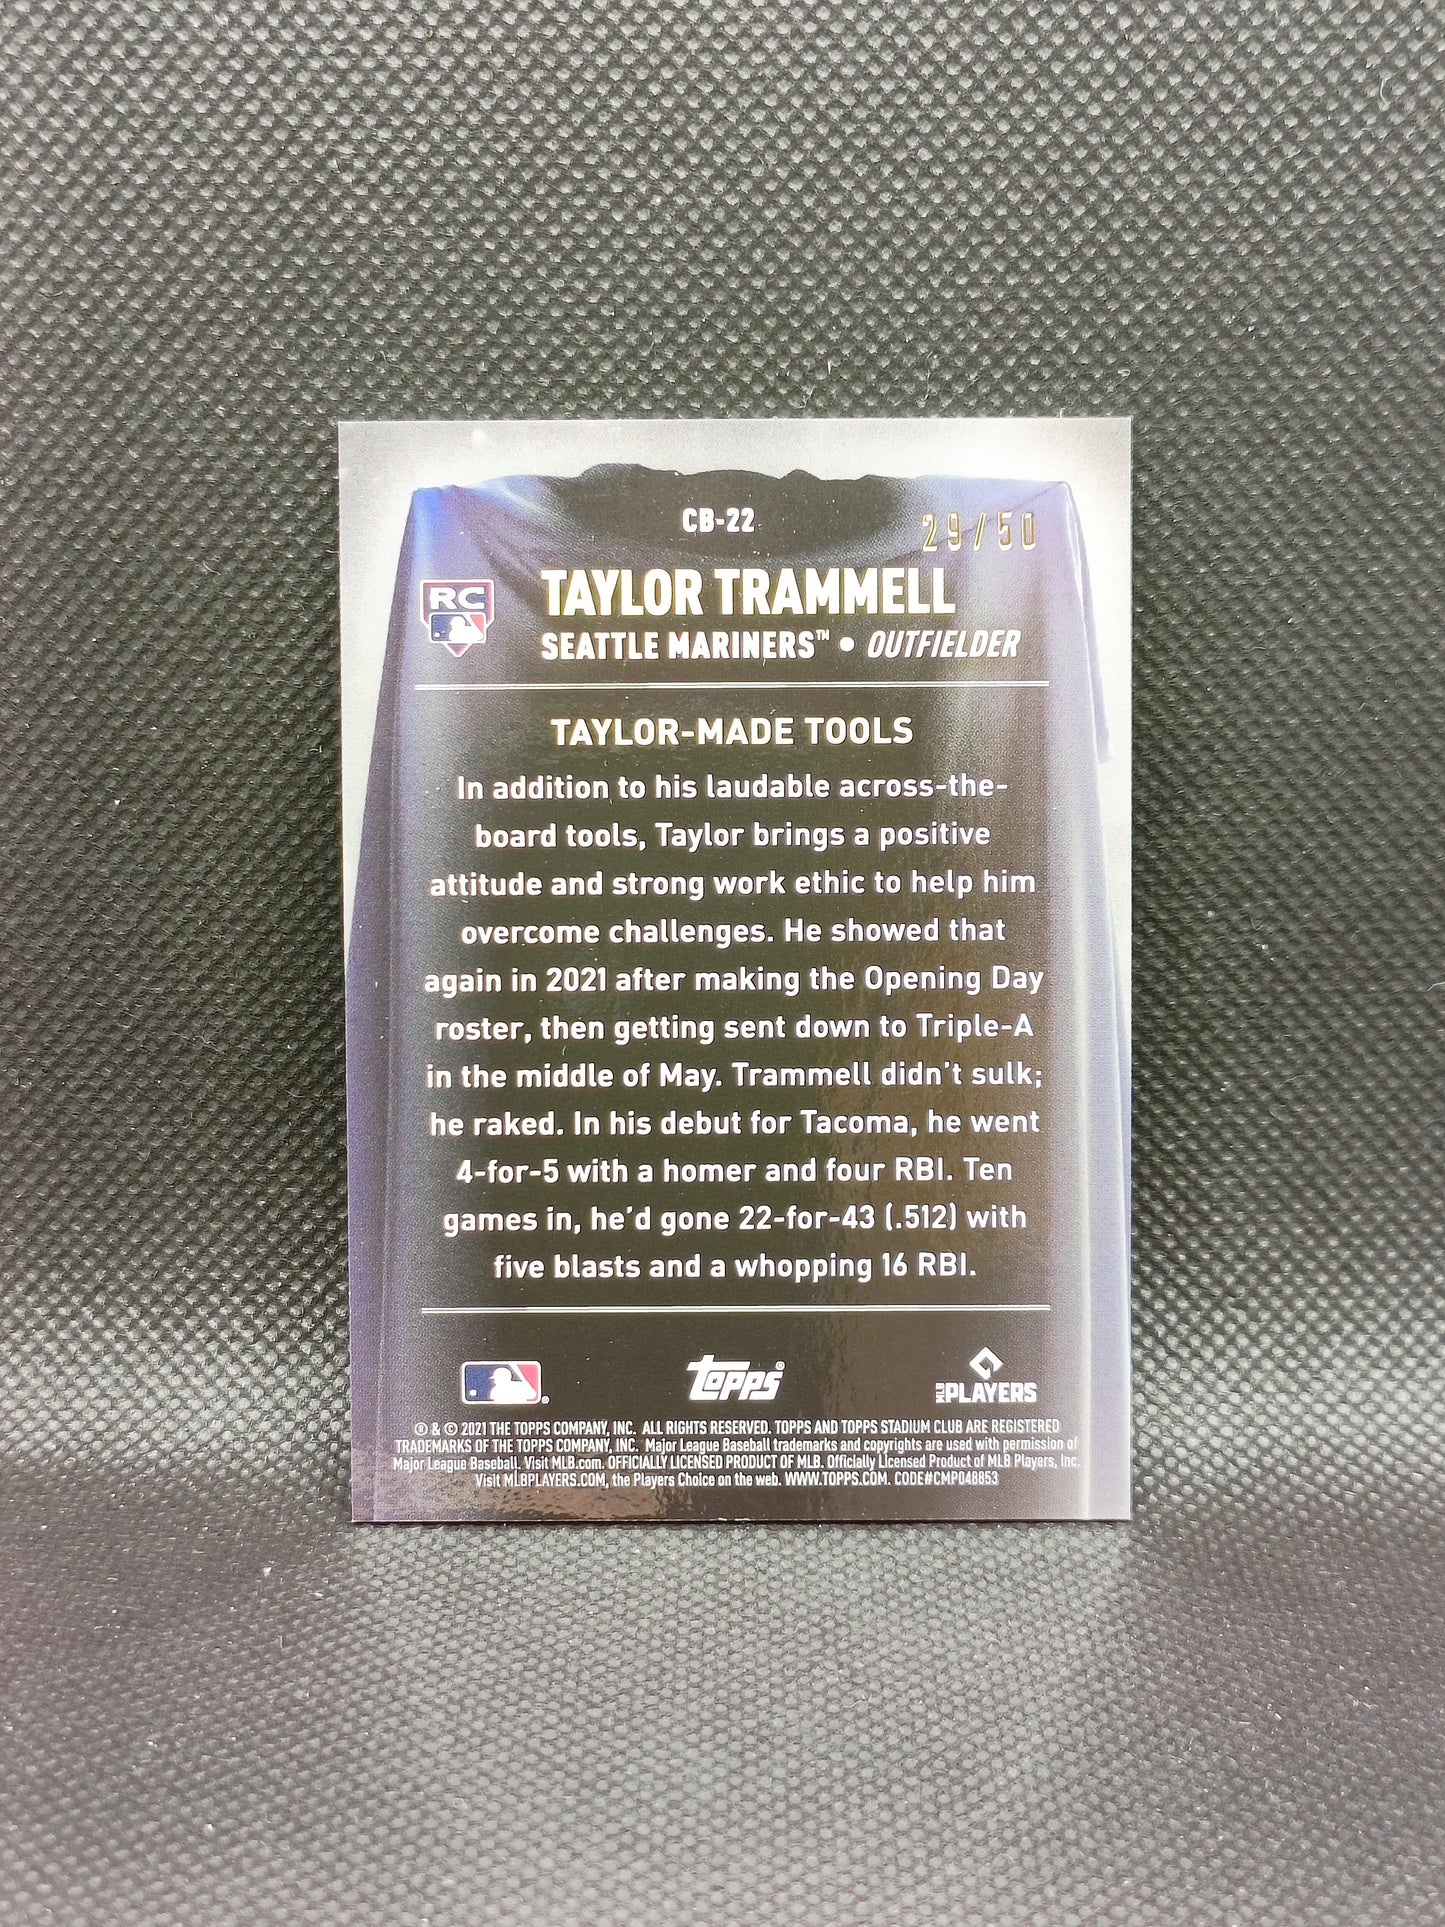 Taylor Trammell - 2021 Topps Stadium Club Chrome Crystal Ball Gold Rookie /50 - Seattle Mariners